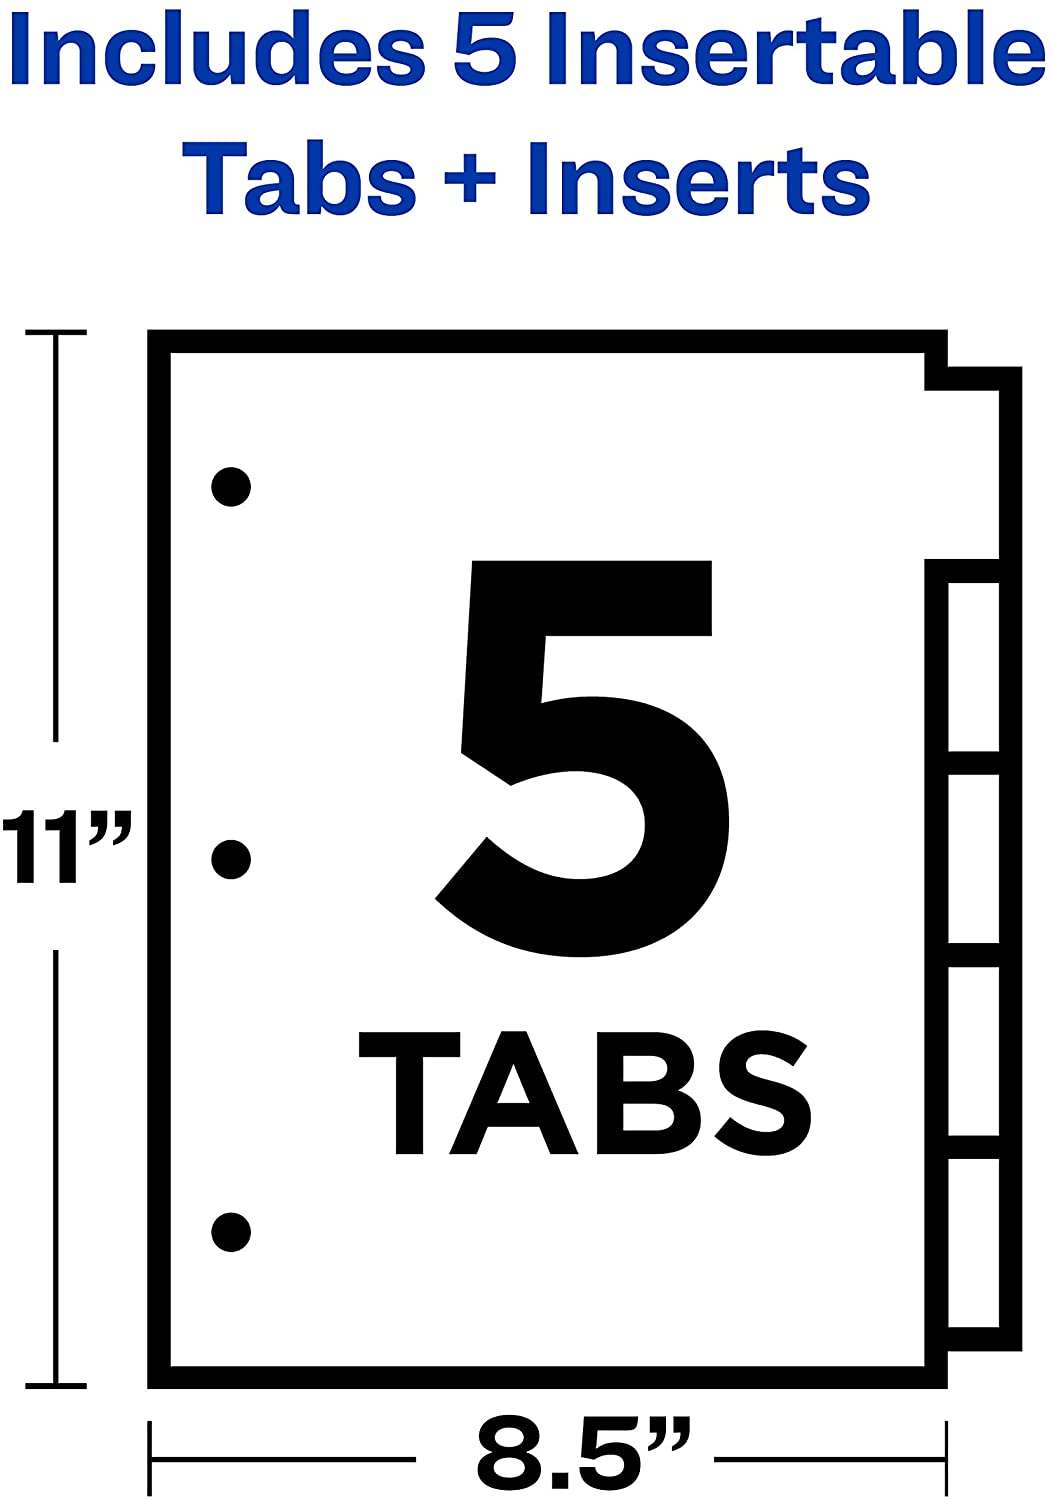 Avery 5-Tab Binder Dividers, Insertable Clear Big Tabs, Letter, 1 Set 50% more writing space